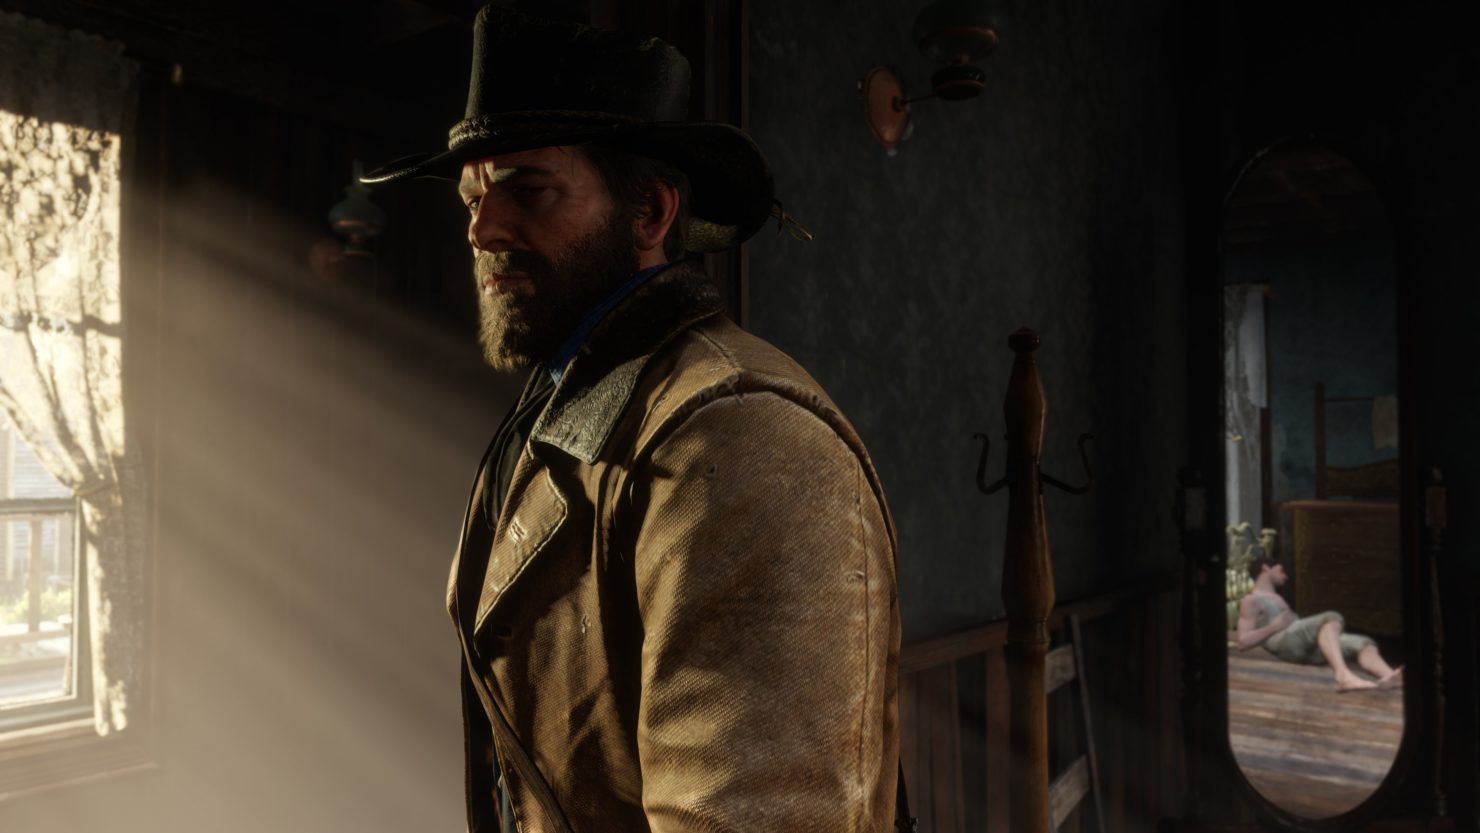 Rockstar Games Launcher has launched, possibly sets up for an RDR2